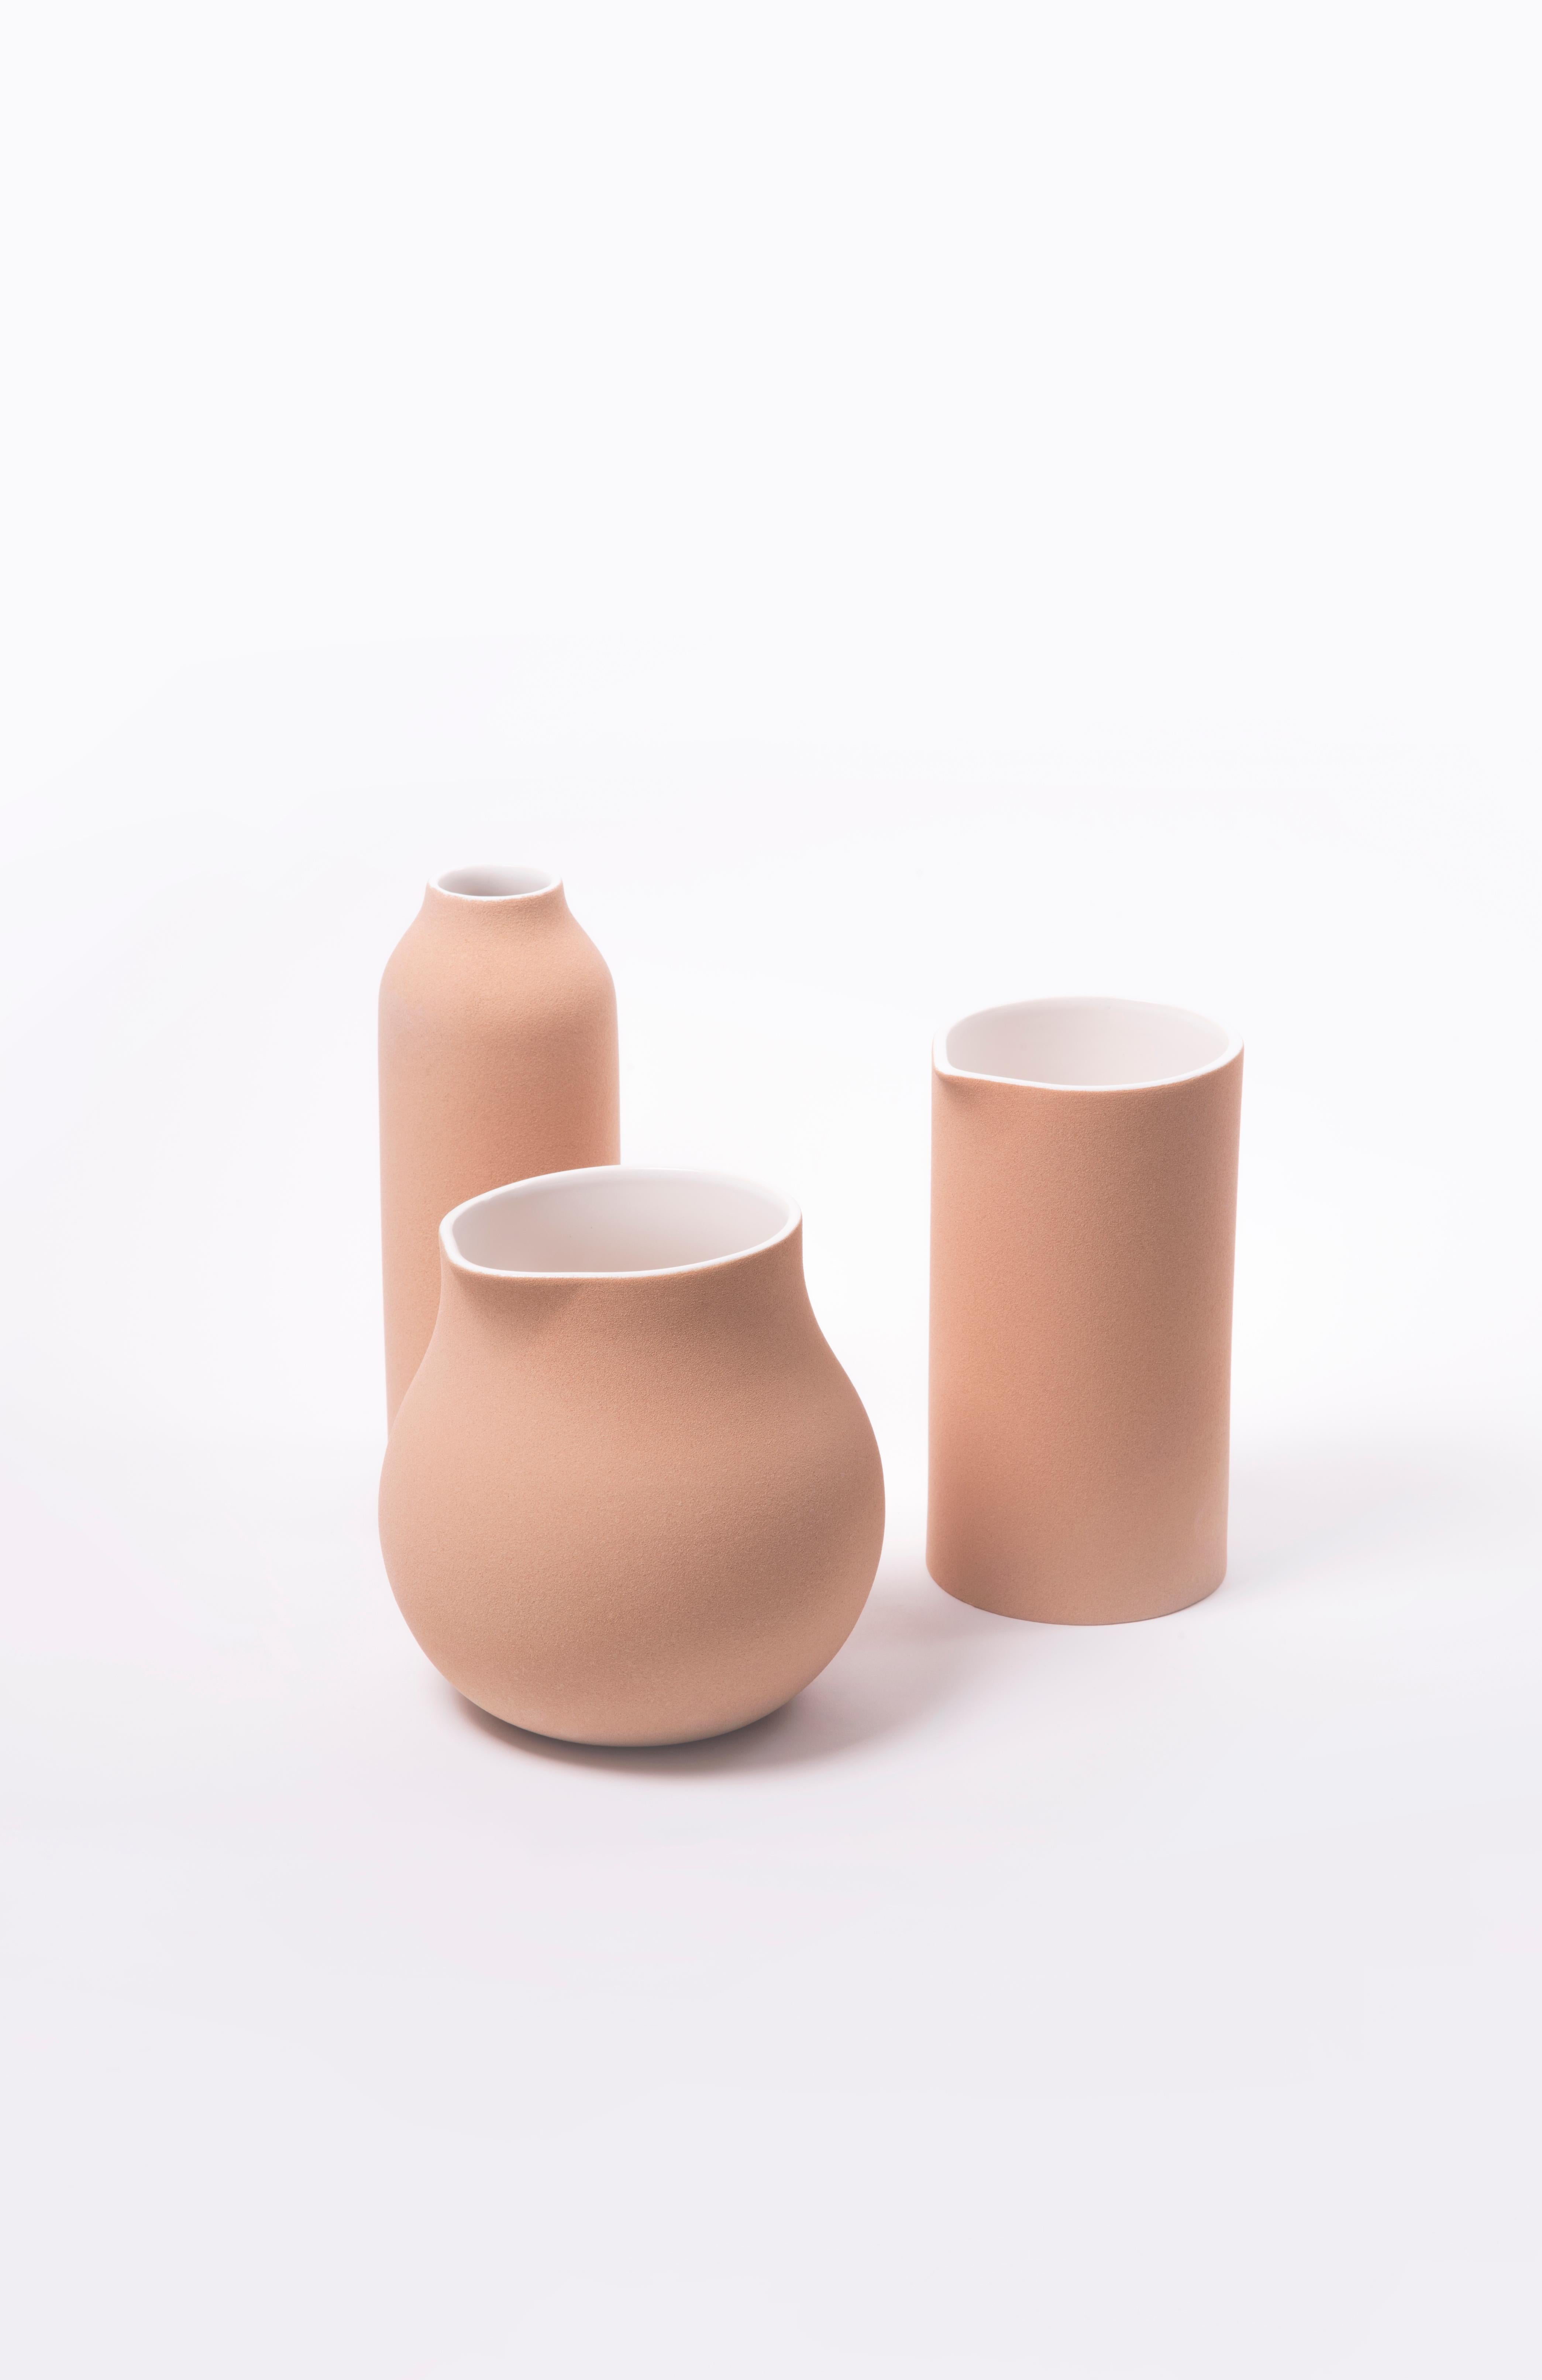 Engobe Series examines the latent dialogues between materiality and place as source of identity. The technical properties of the texture of these beautiful pieces are achieved after a careful selection of mixed material-led manufactures, while their